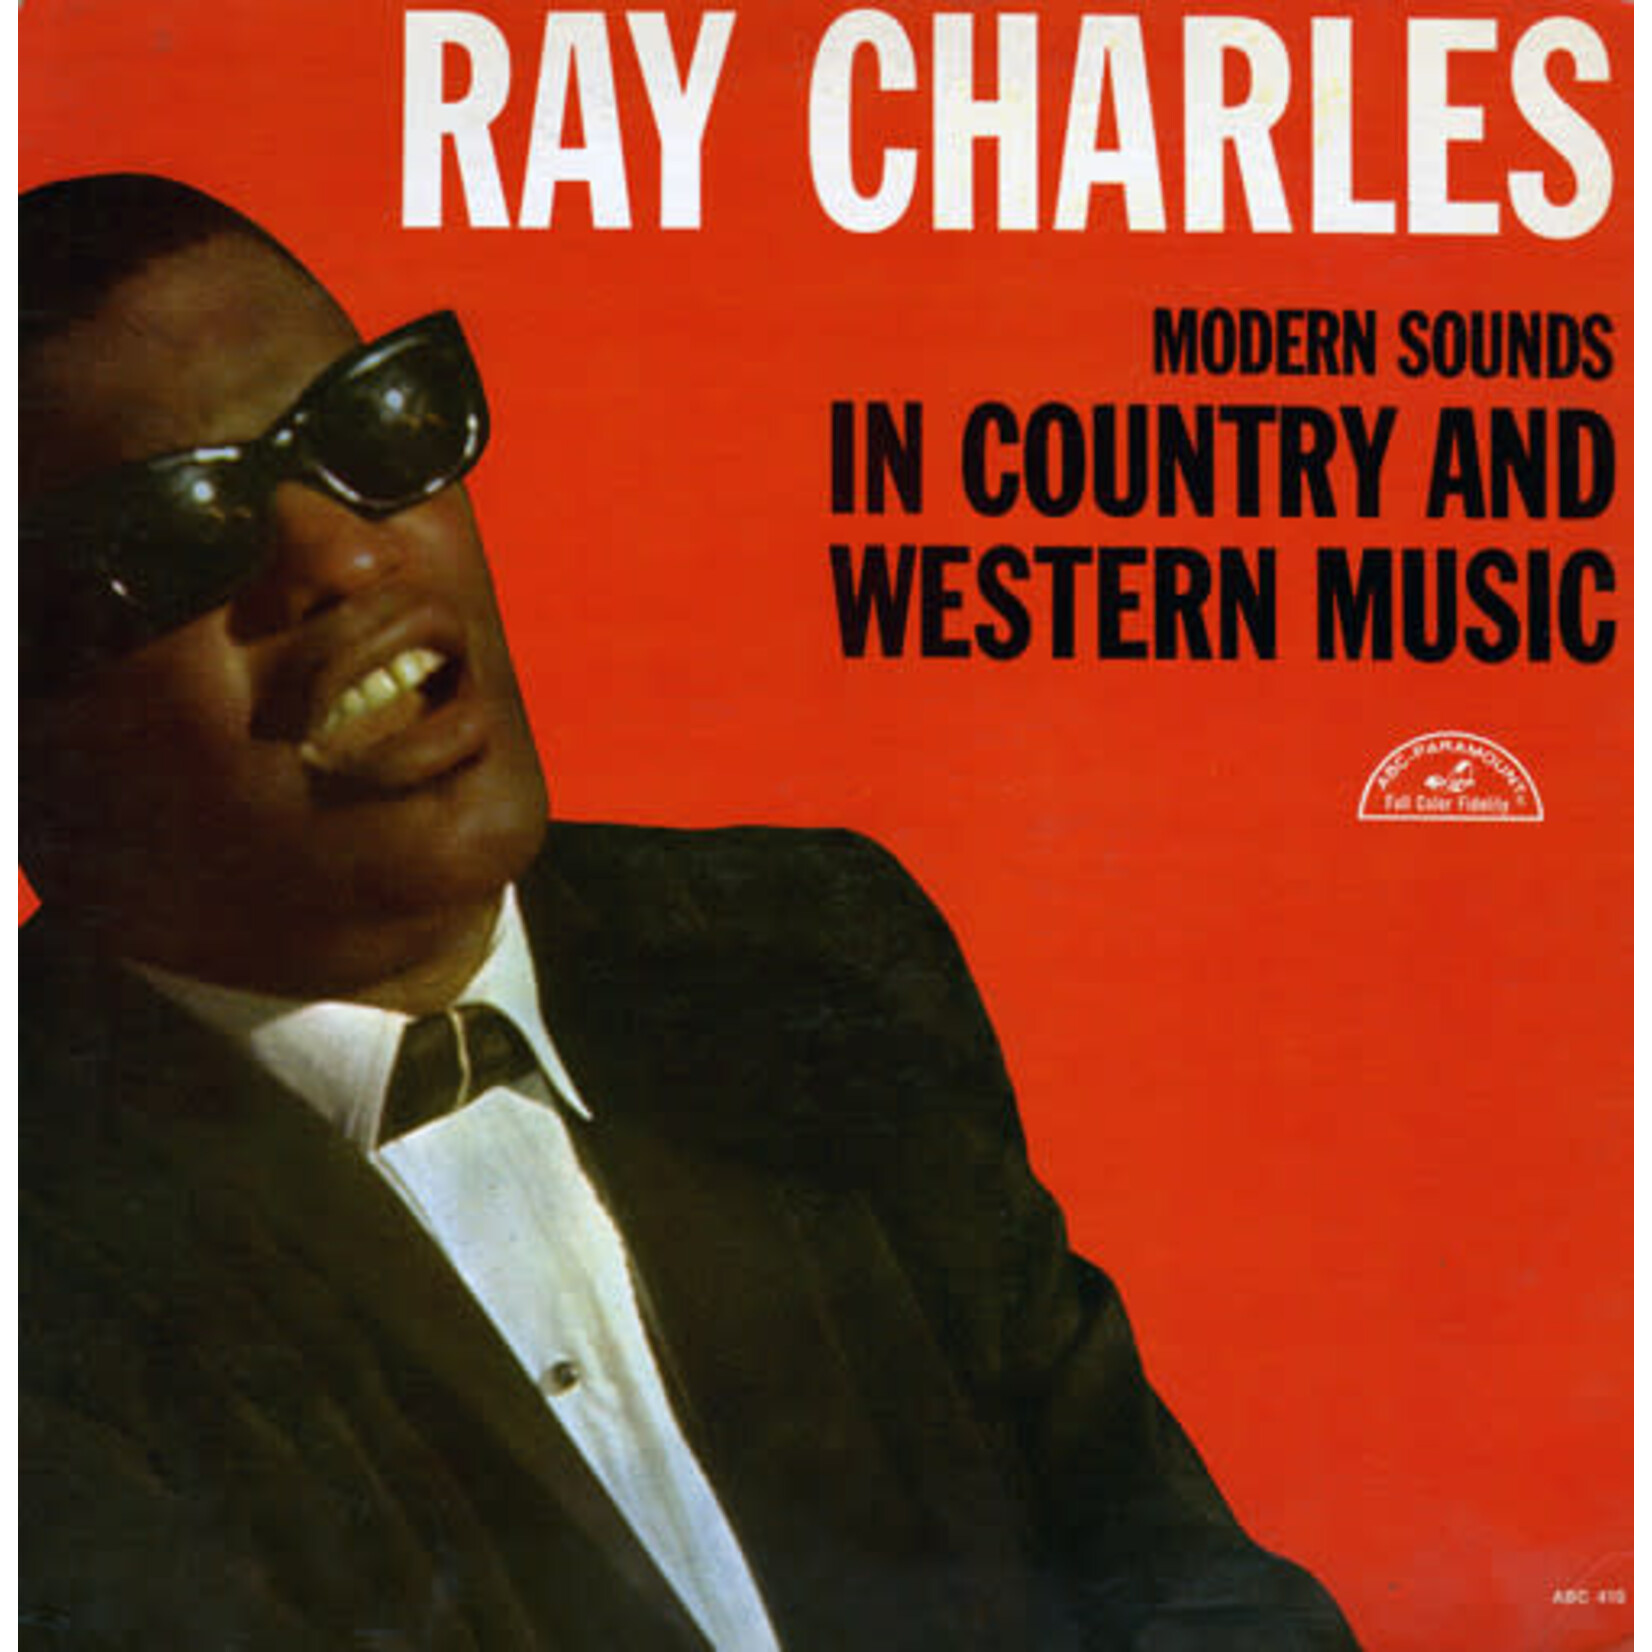 [Vintage] Ray Charles - Modern Sounds in Country & Western Music